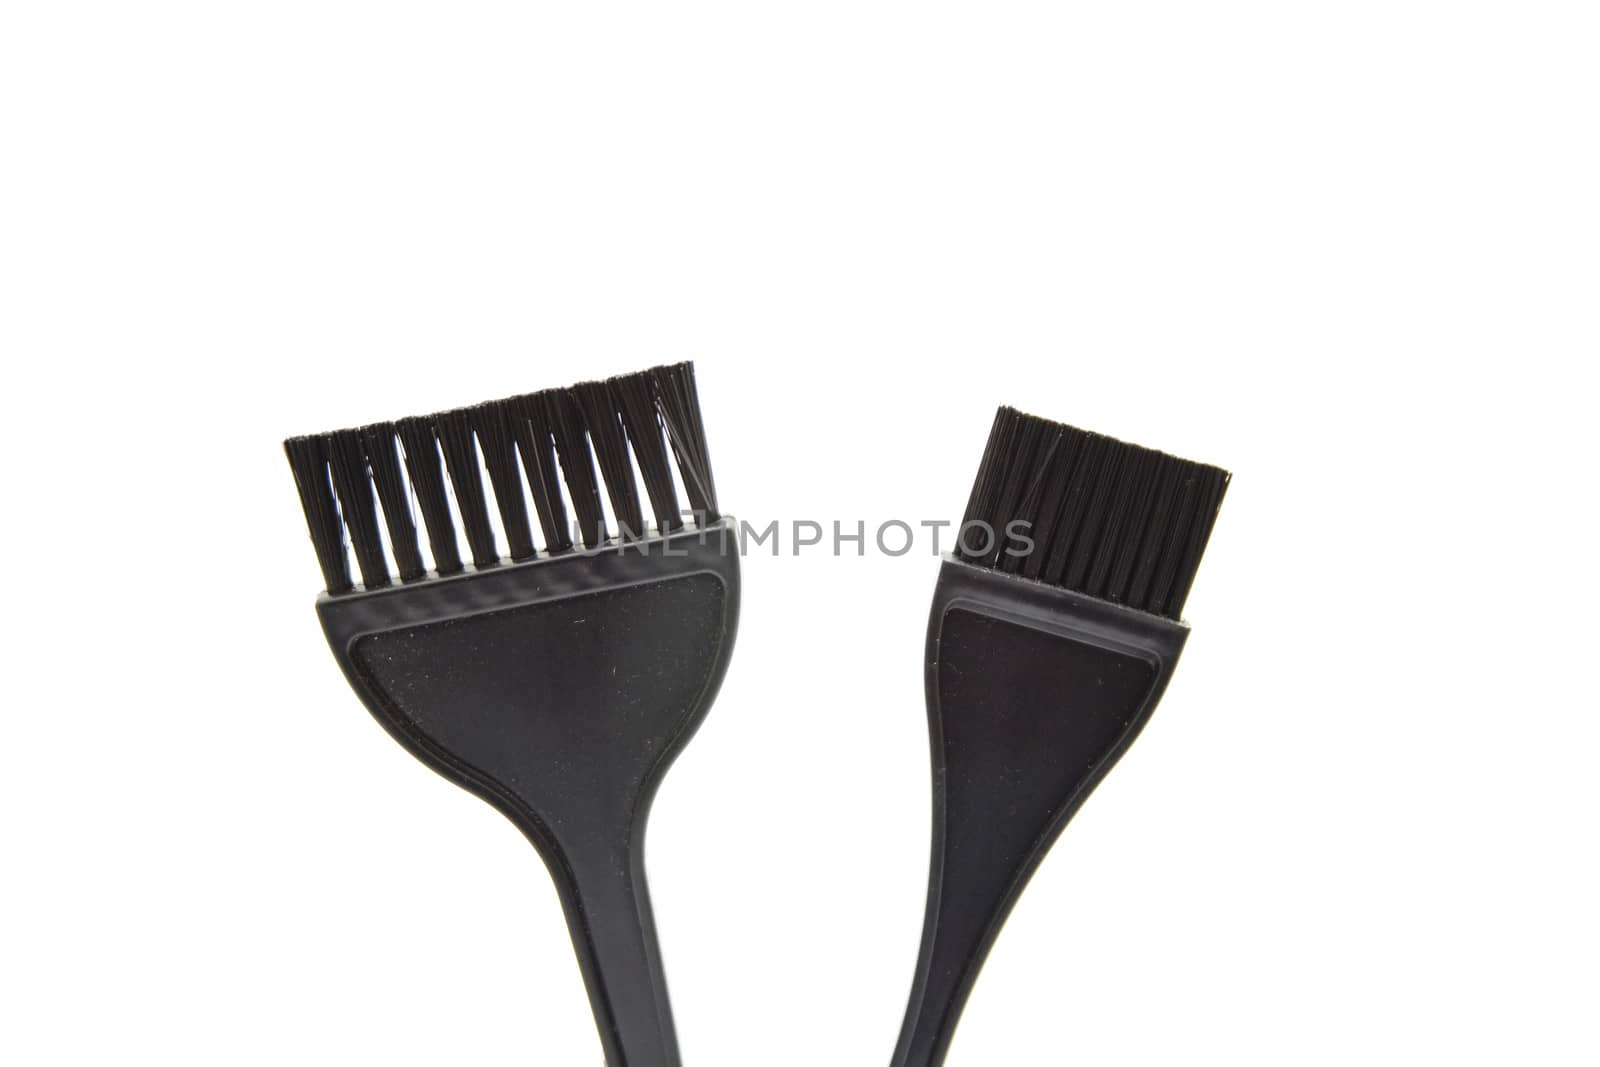 Coloring Hair Brush on white background by KEVMA21